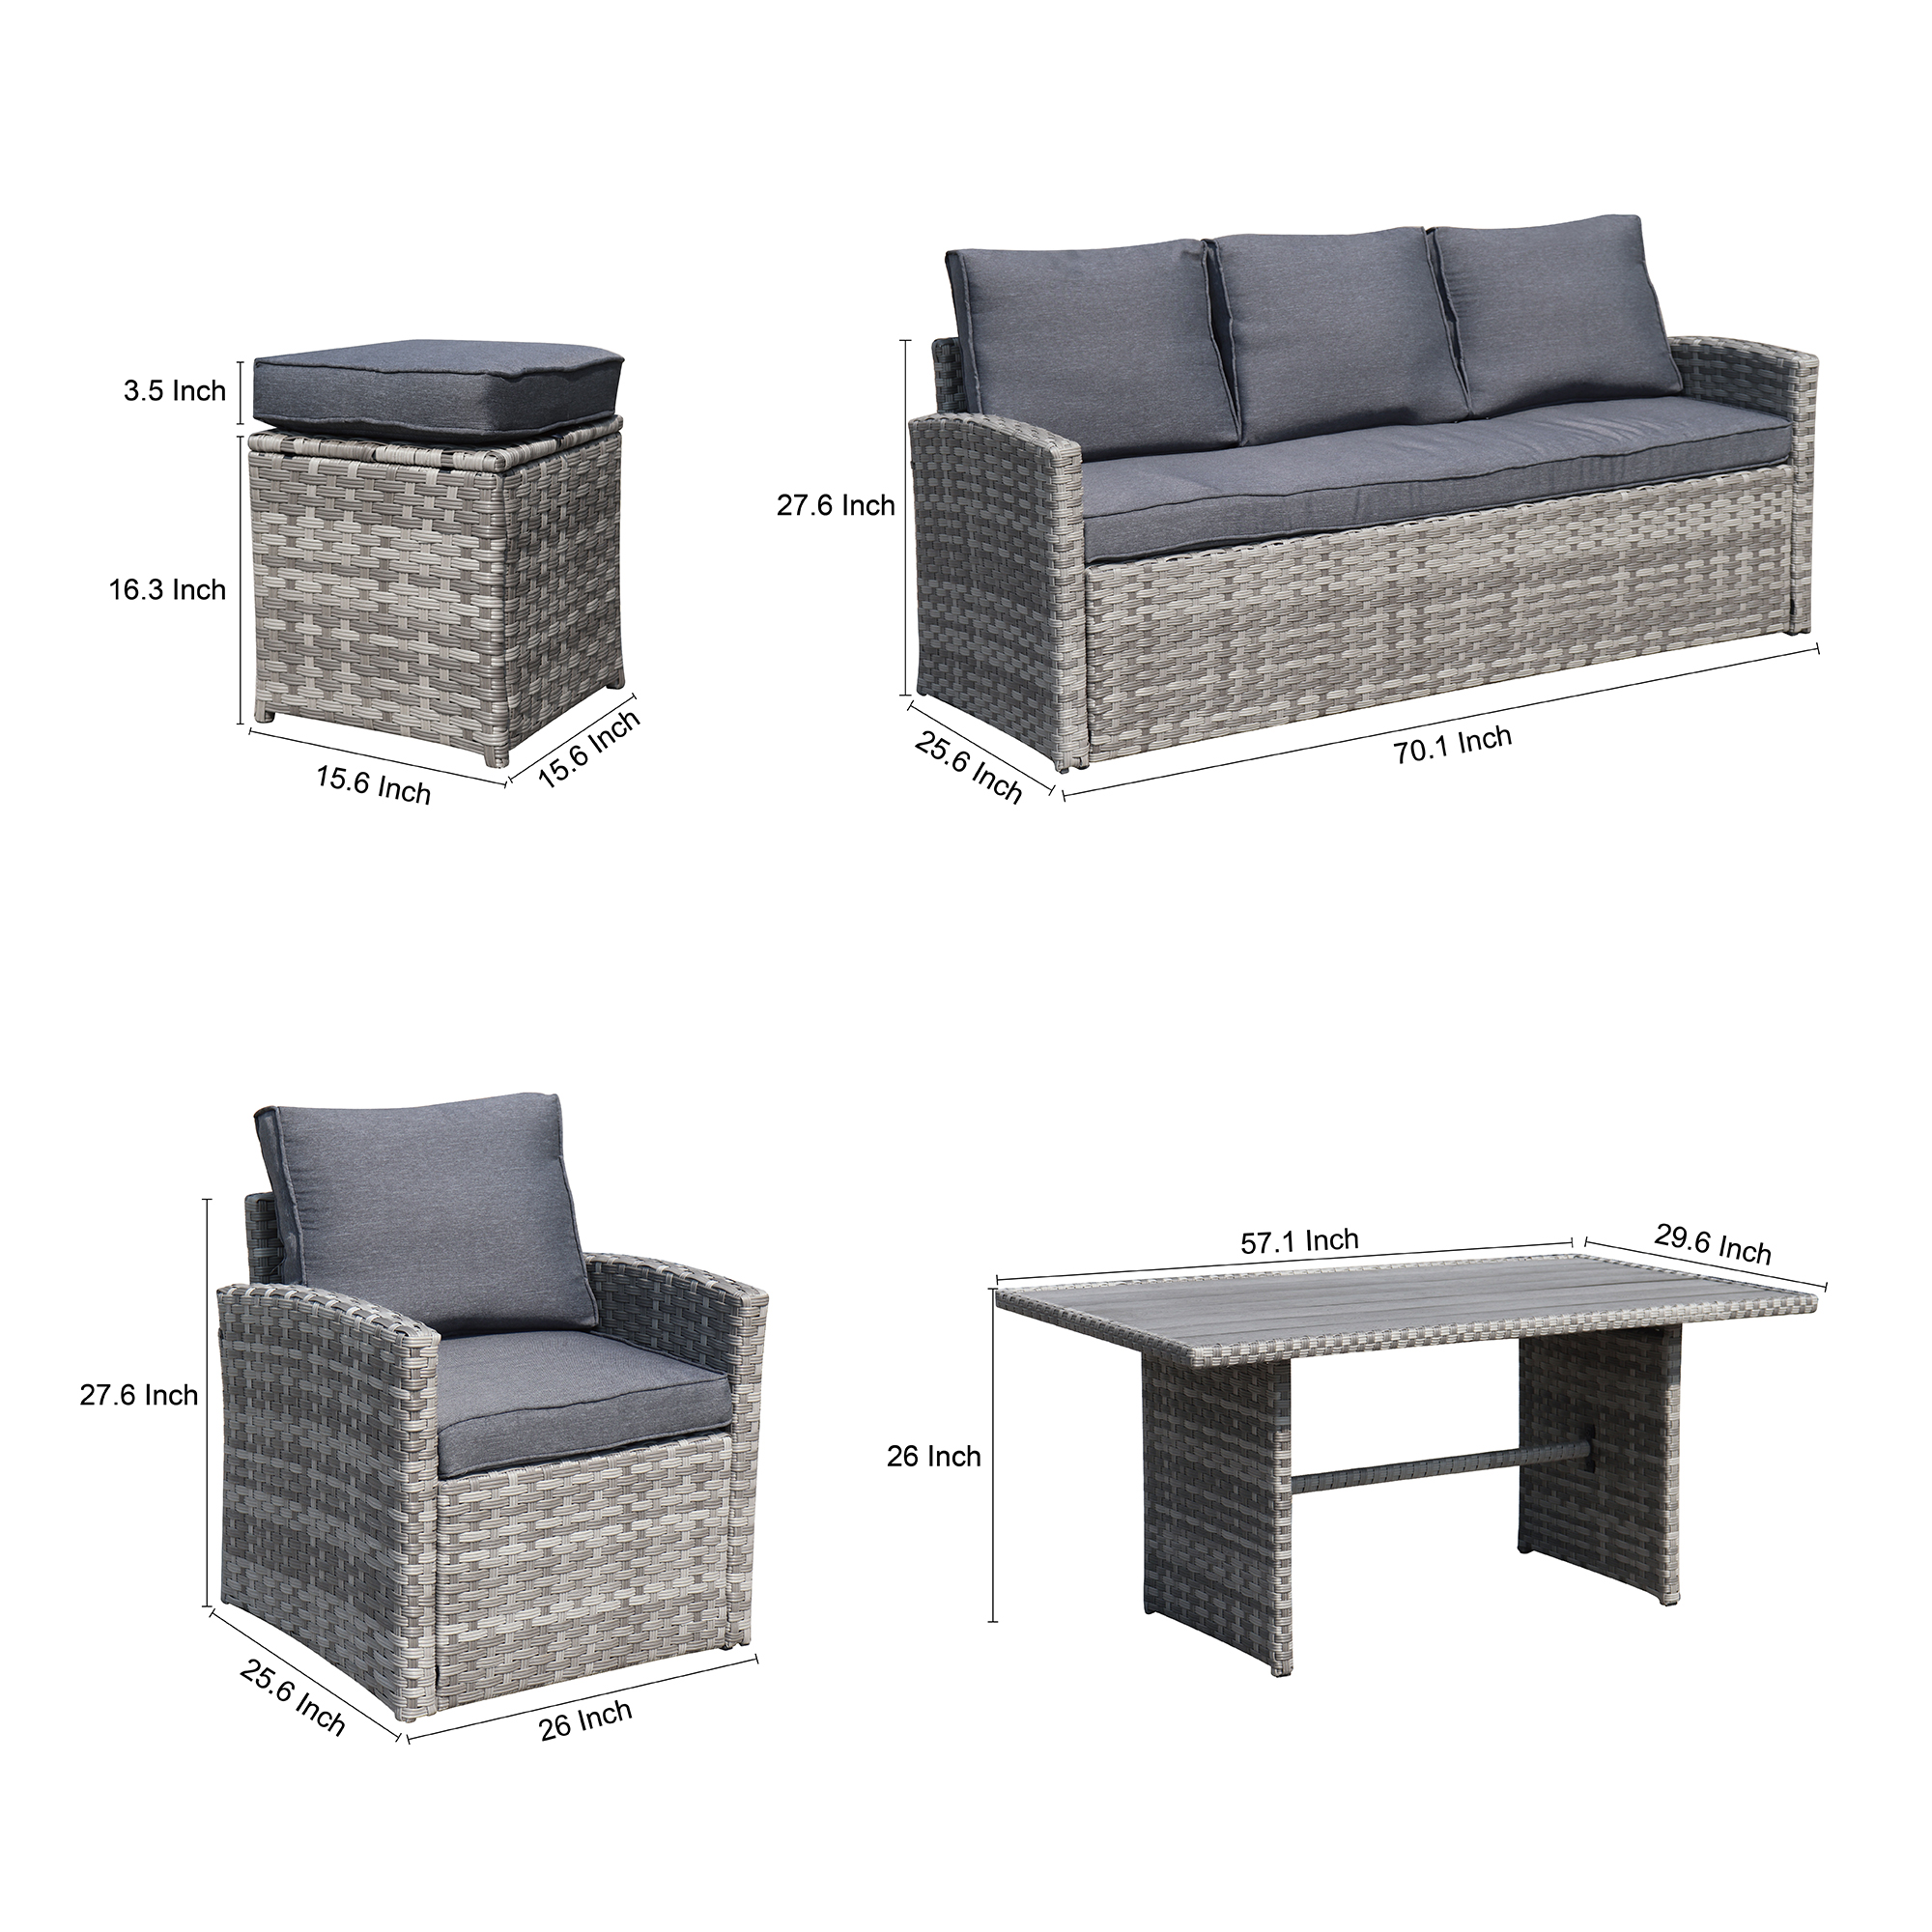 Patio Wicker Sofa Sets, 6 Piece Sectional Furniture Set with Dining Table, All Weather Rattan Furniture Set, Outdoor Conversation Chairs Set with Cushions, for Poolside, Backyard, Deck, D8177 - image 3 of 12